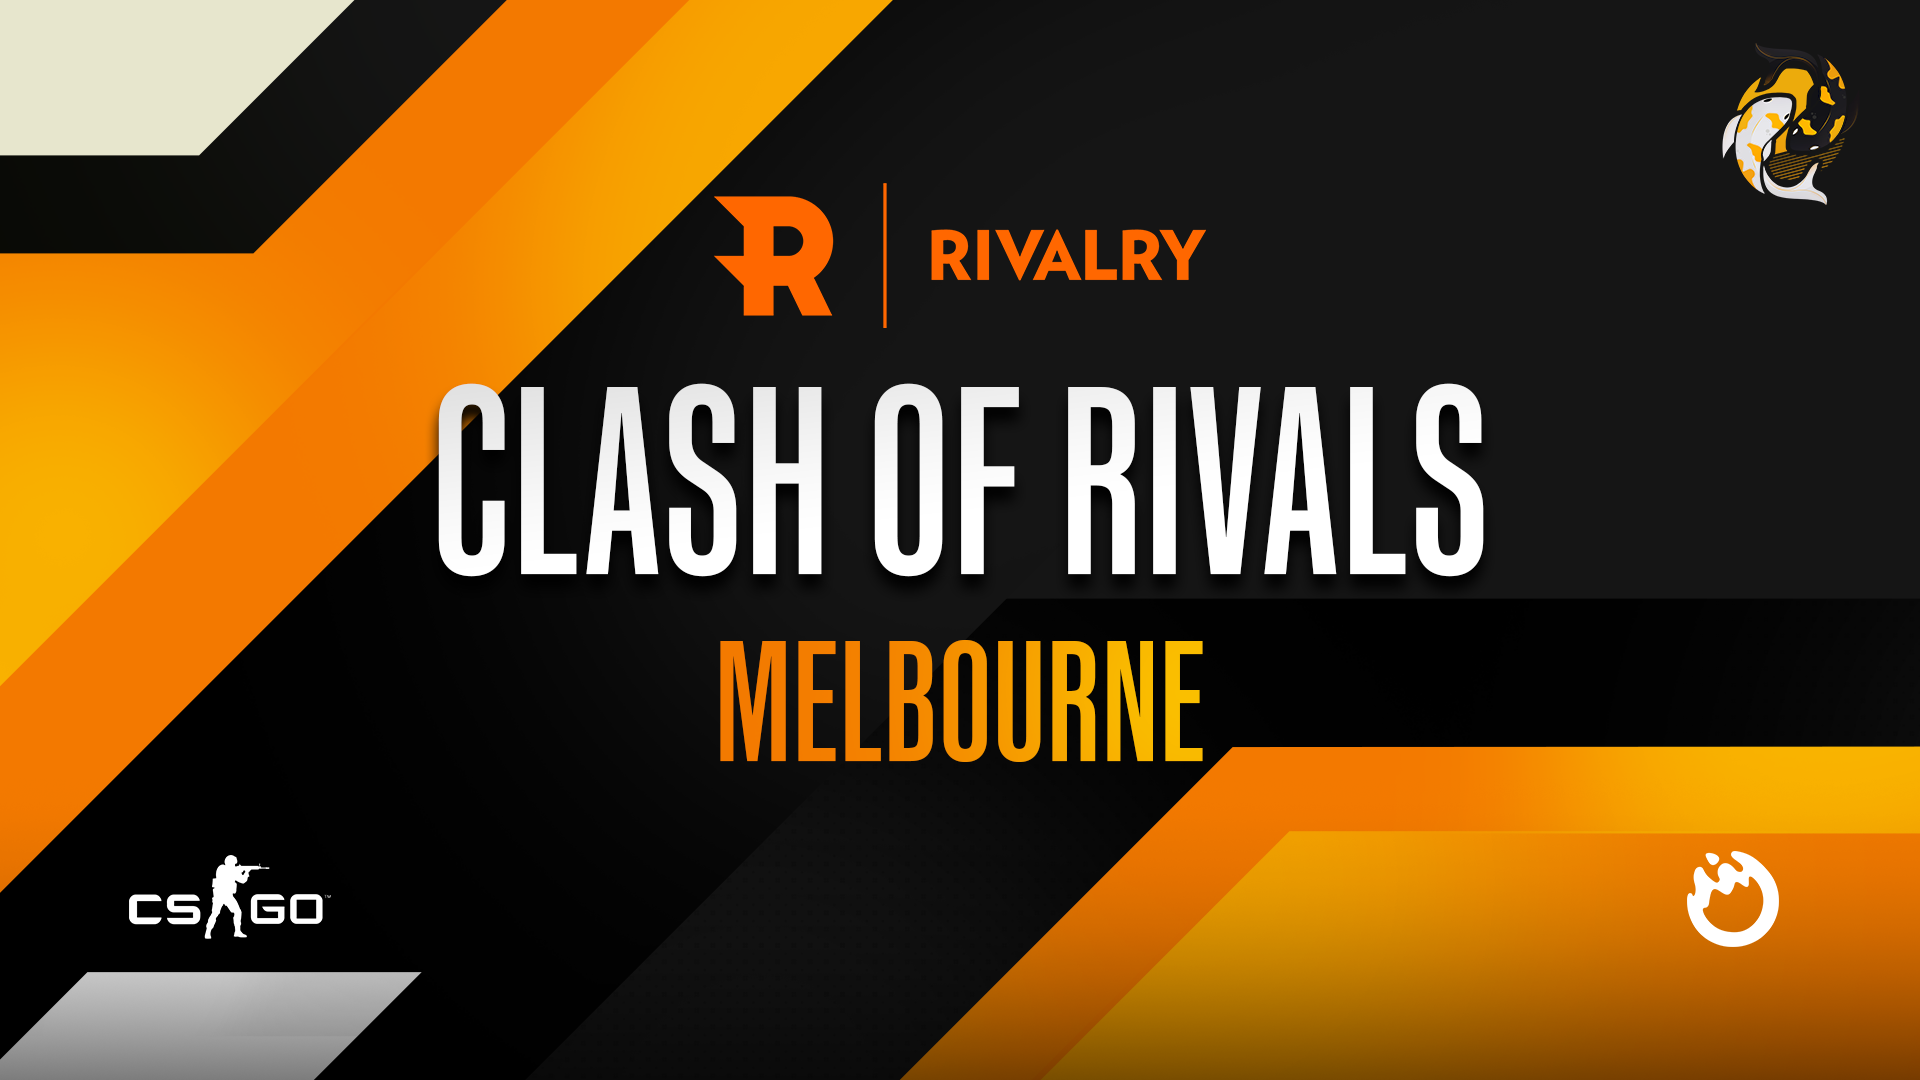 Rivalry betting on Oceania's grassroots CS:GO scene with Clash of Rivals